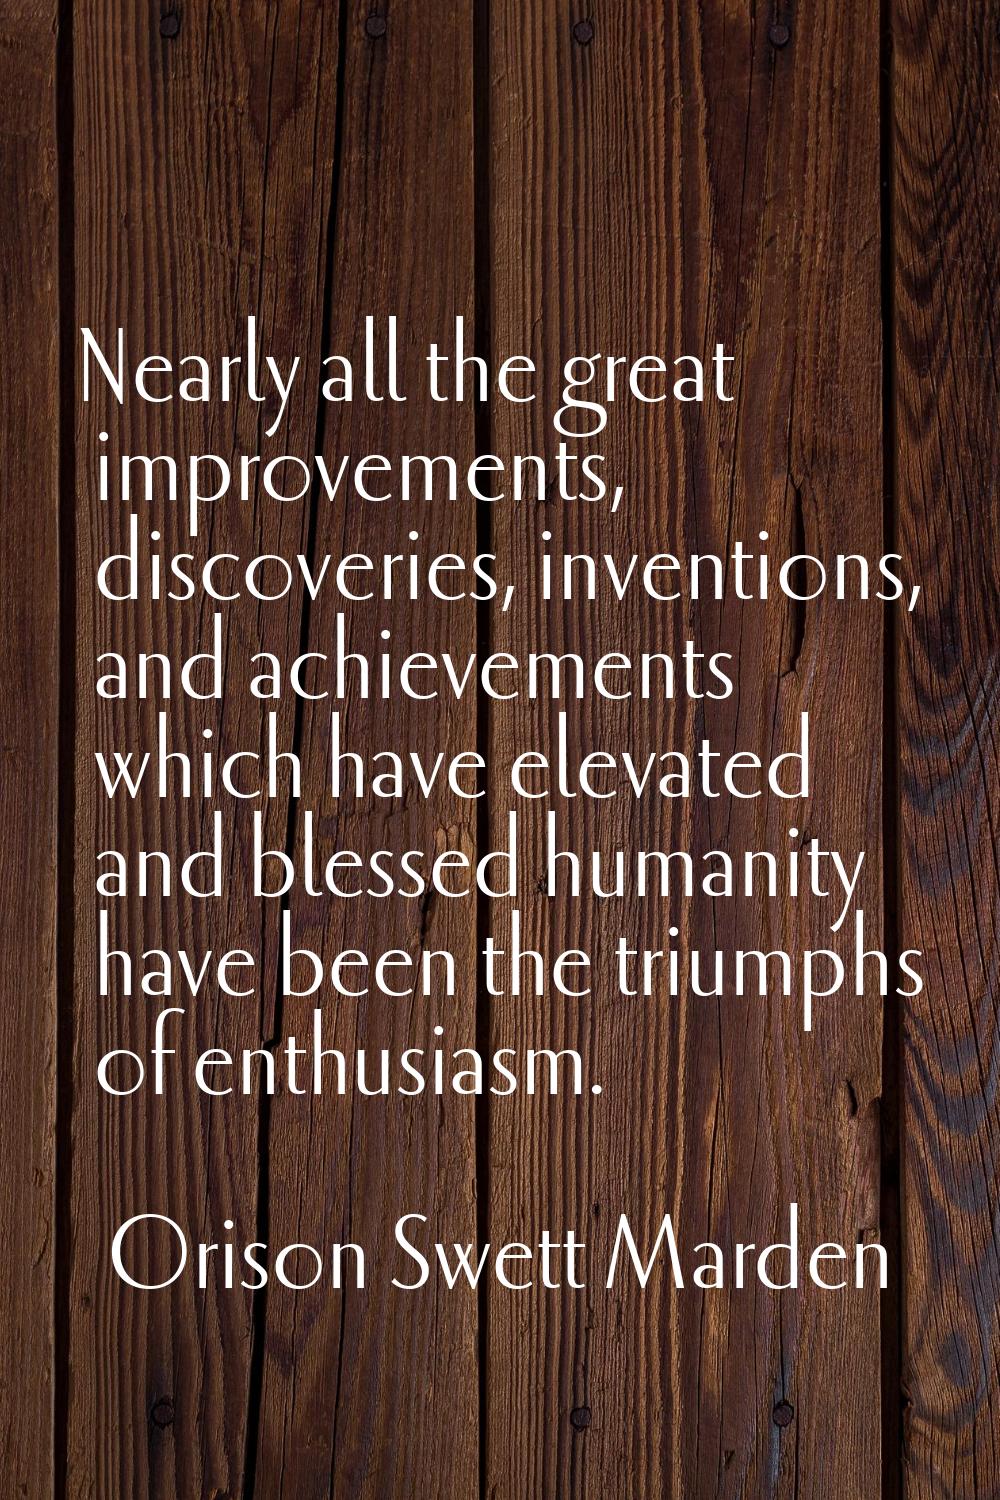 Nearly all the great improvements, discoveries, inventions, and achievements which have elevated an